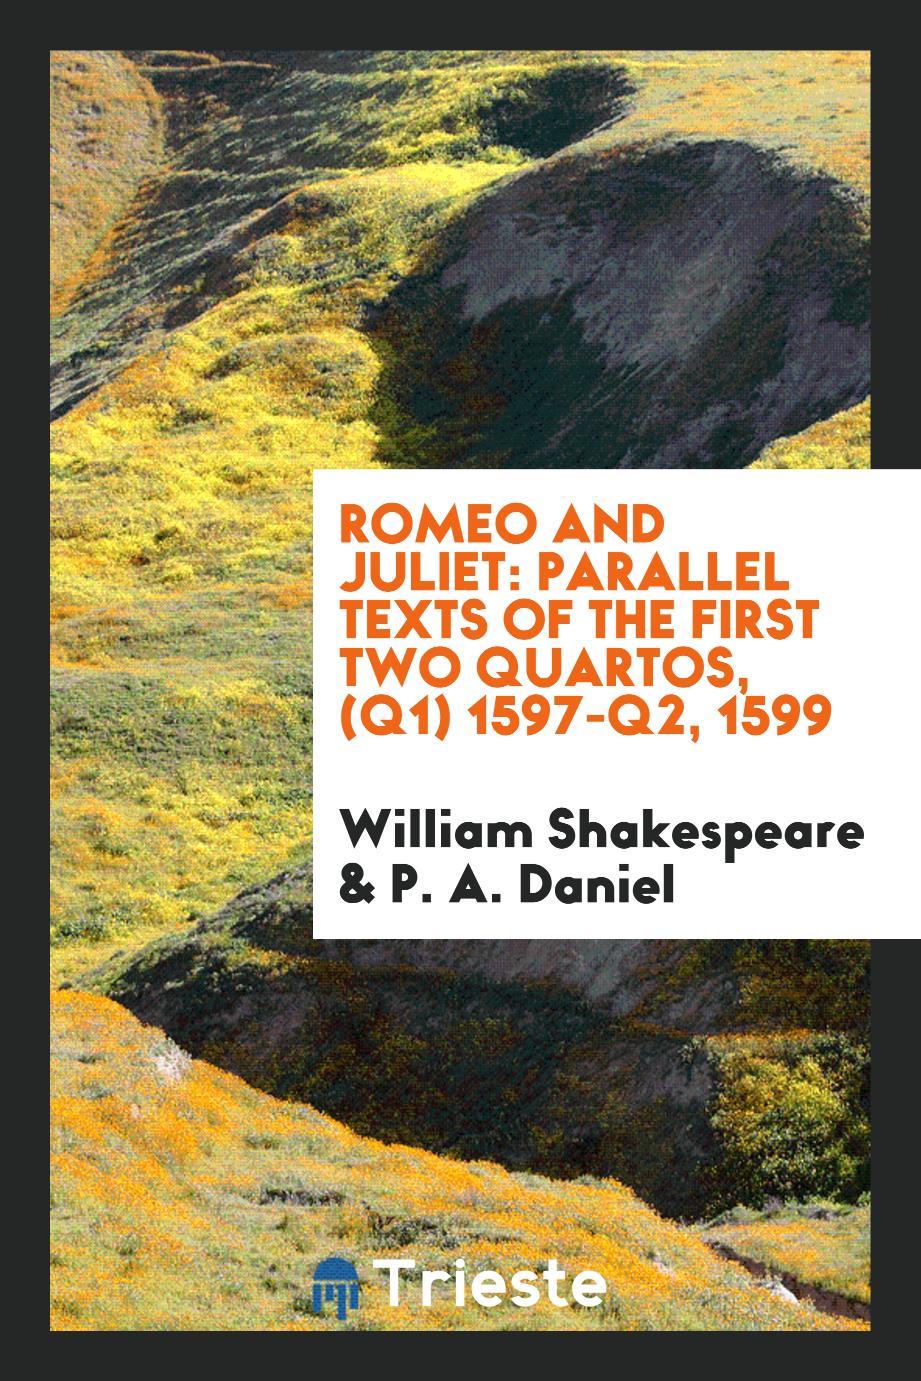 Romeo and Juliet: parallel texts of the first two quartos, (Q1) 1597-Q2, 1599